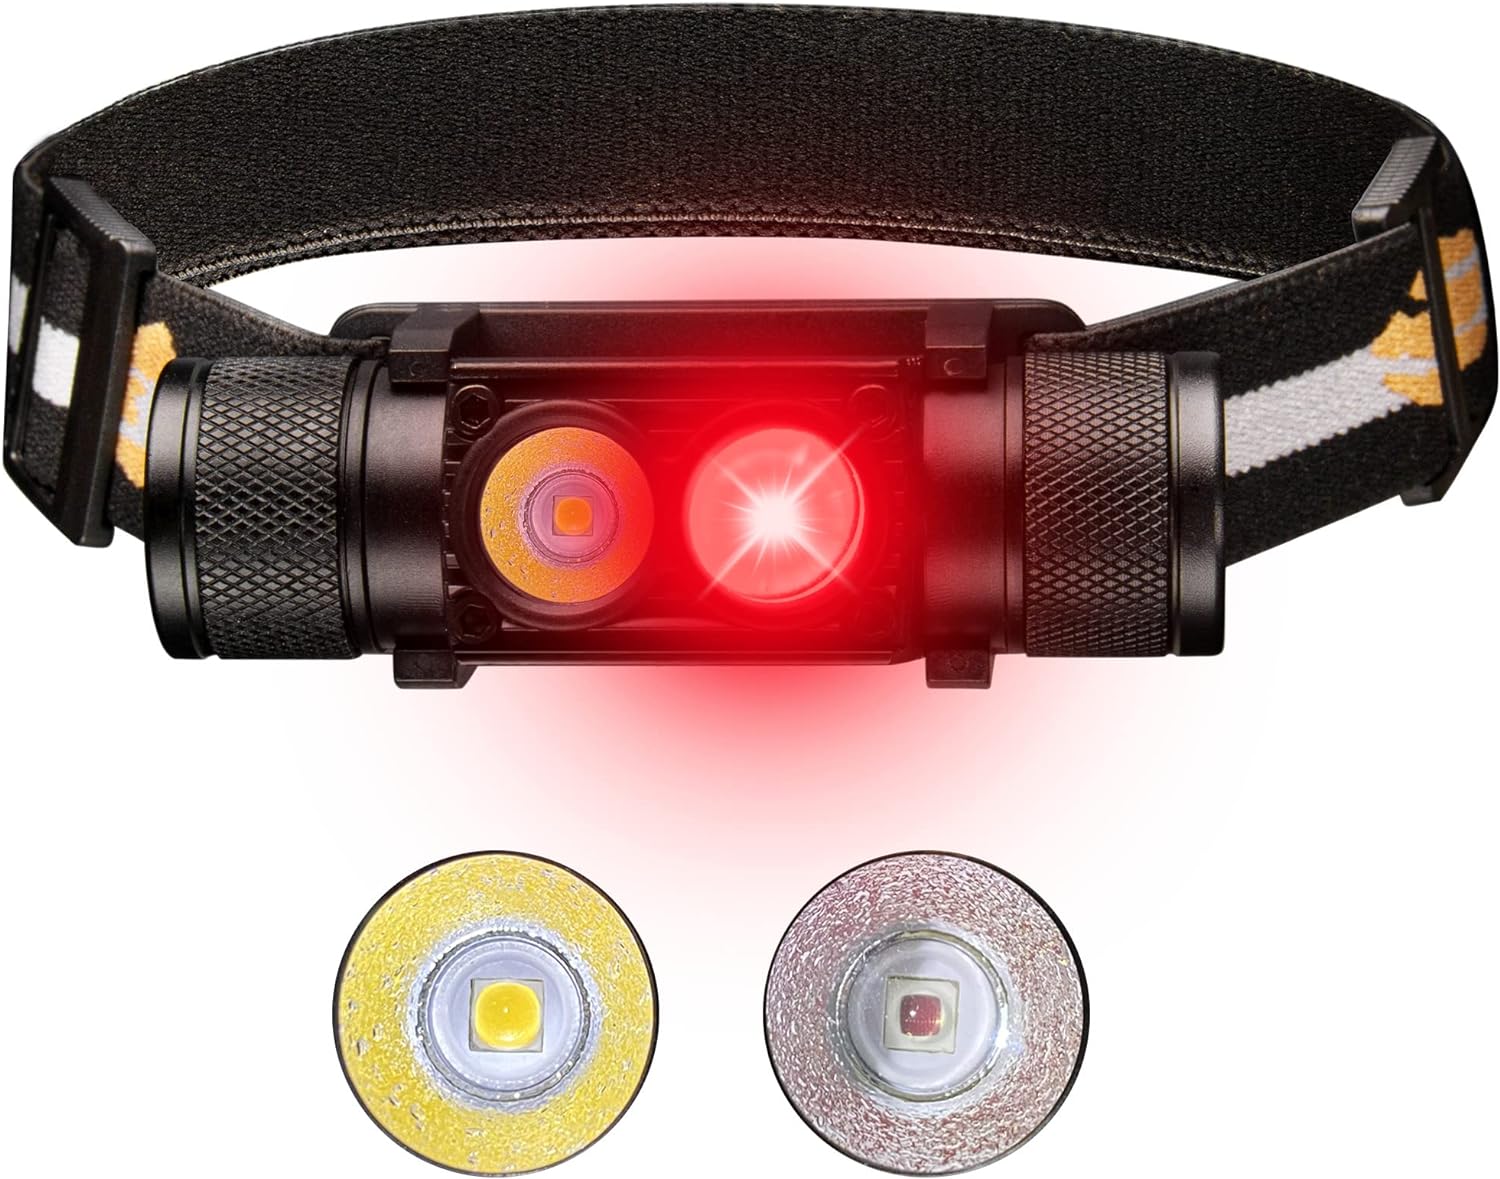 Sofirn D25S Headlamp / 77outdoor D25LR Headlamp with Red LED, $17.99 after 40%off Discount $18